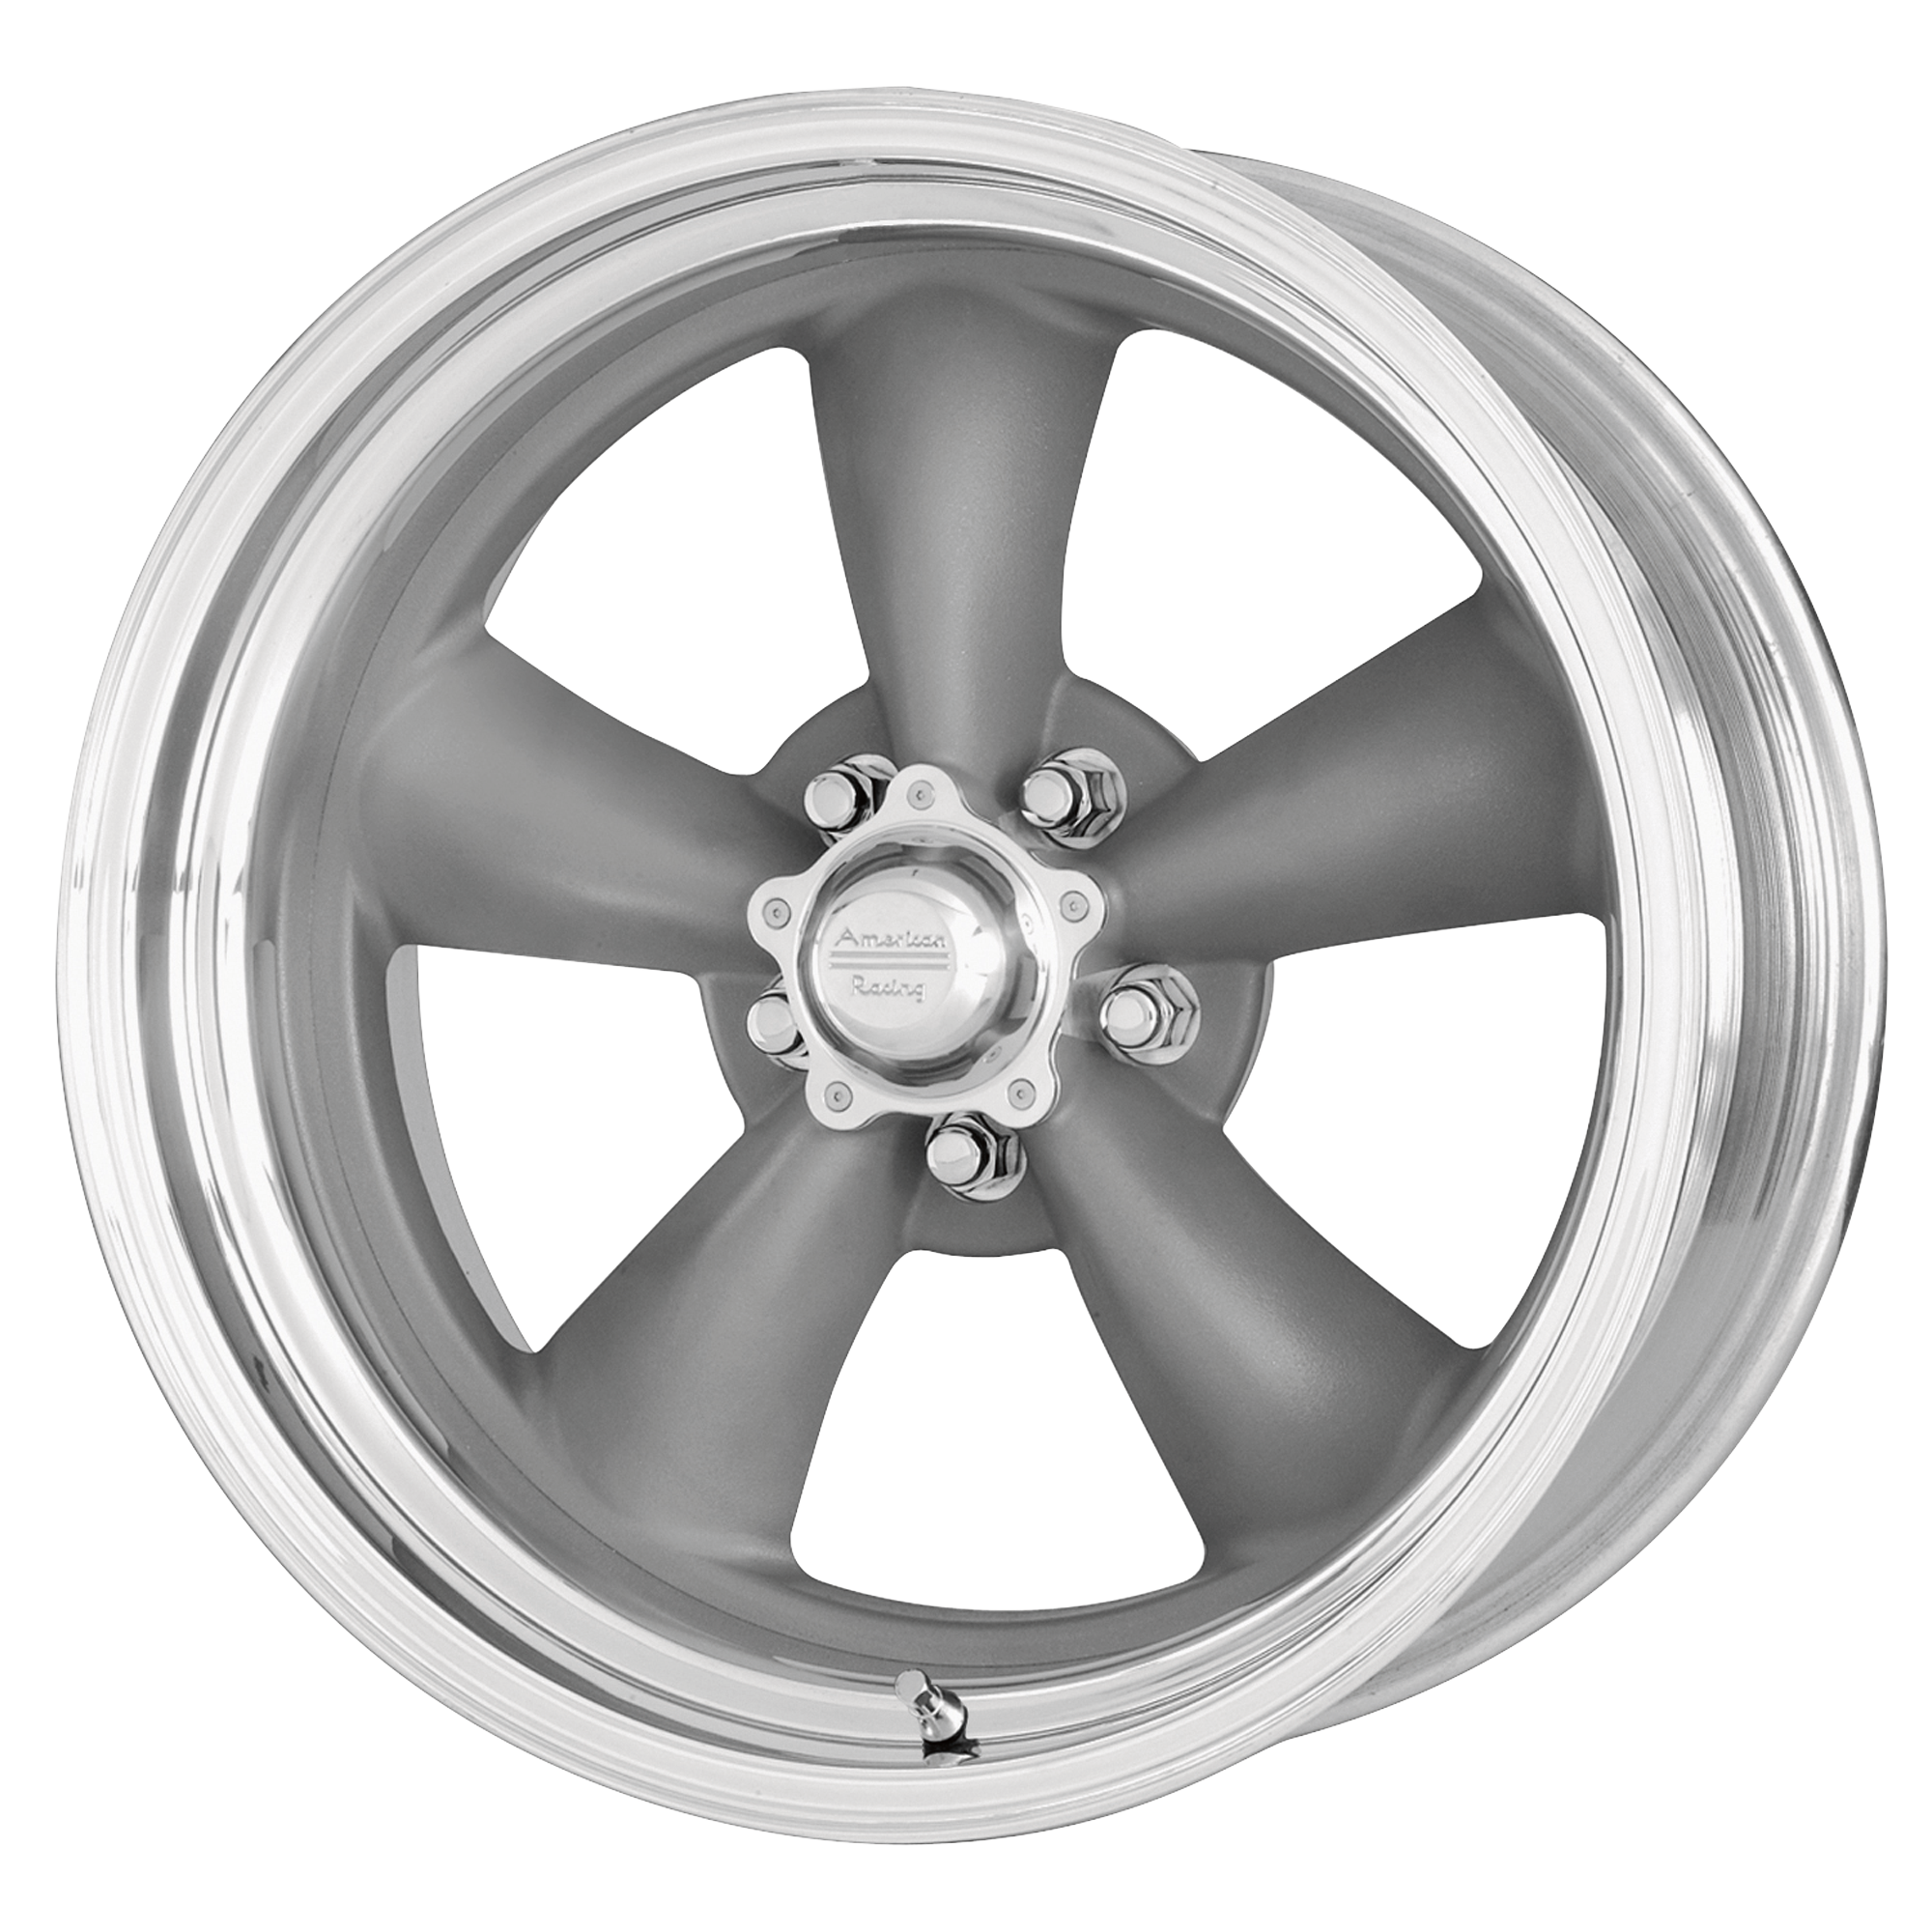 CLASSIC TORQ THRUST II ONE PIECE 18x7 Blank MAG GRAY W/ MACHINED LIP (6 mm) - Tires and Engine Performance